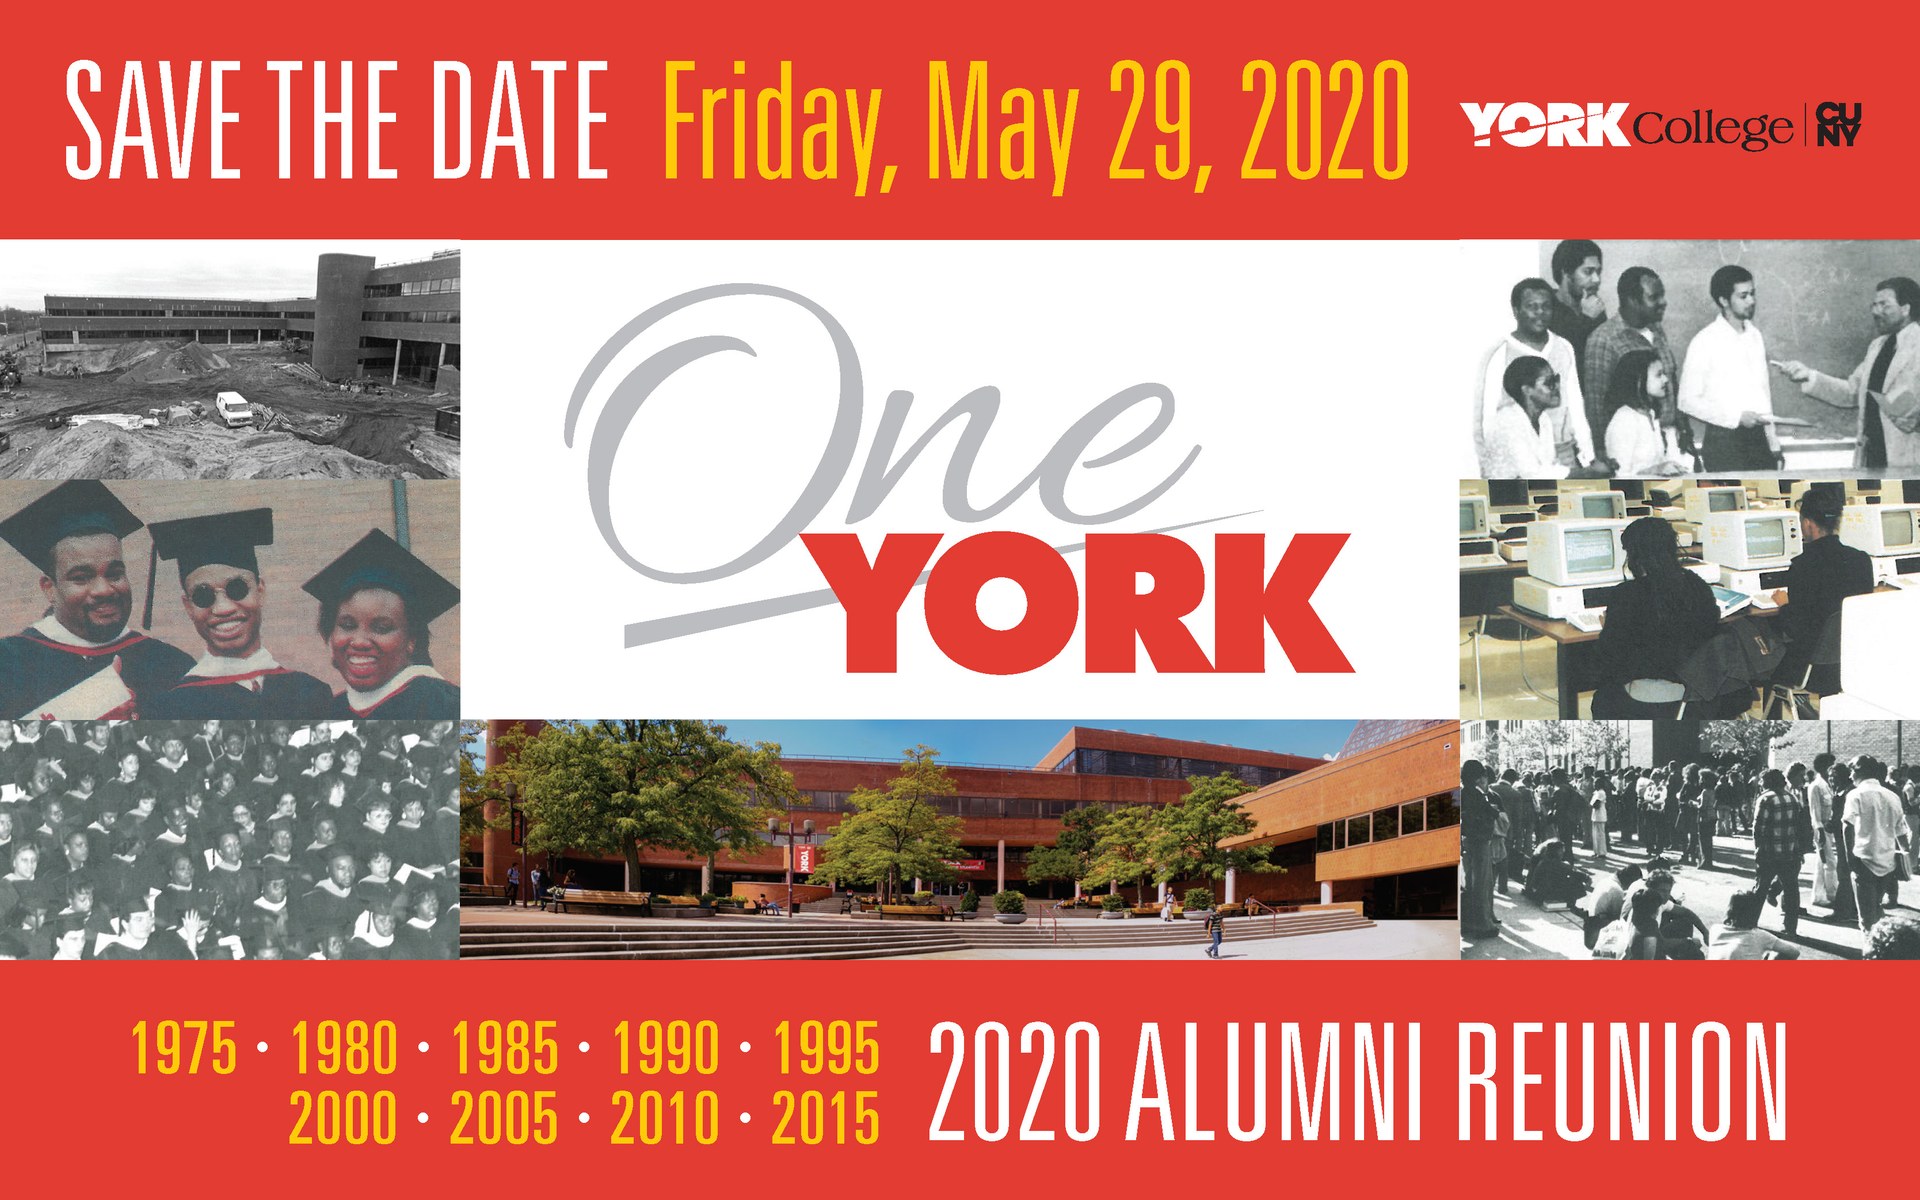 Save the Date Friday, May 29, 2020 York Colleg CUNY 1975, 1980, 1985, 1990, 1995, 2000, 2005, 2010, 2015